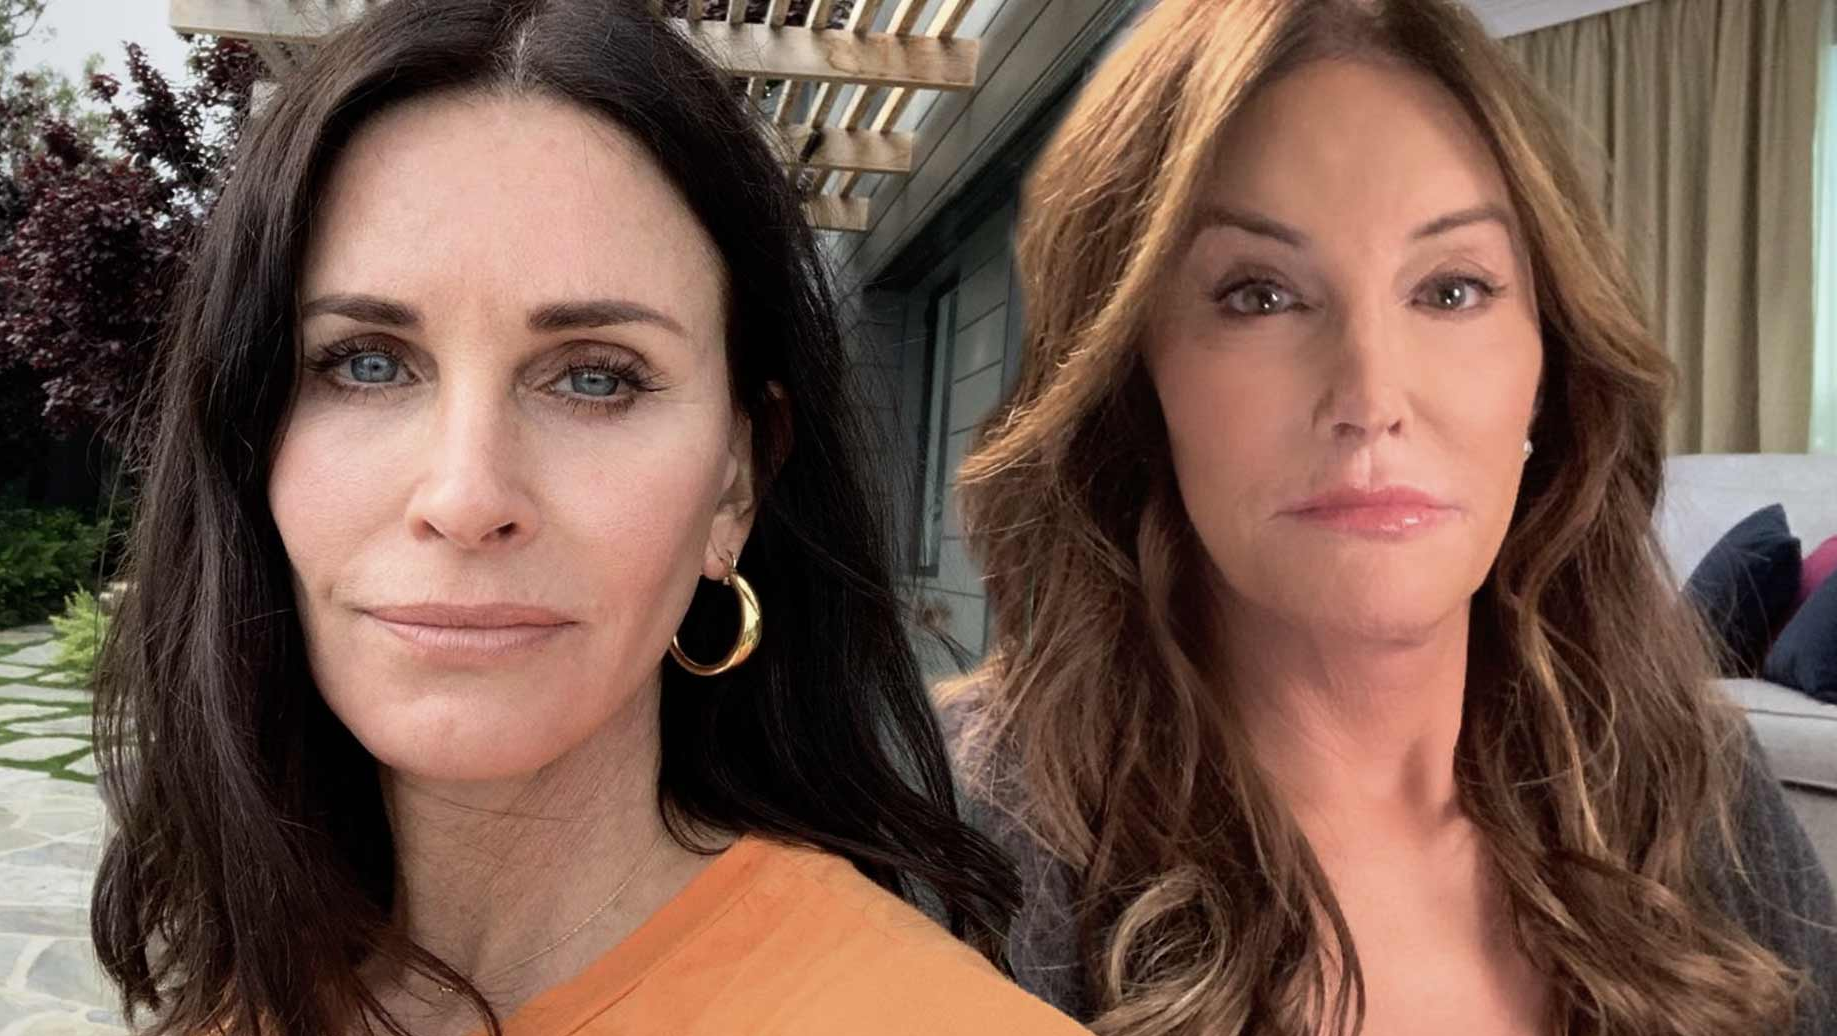 How Did Courteney Cox React When She Got Compared To Caitlyn Jenner?